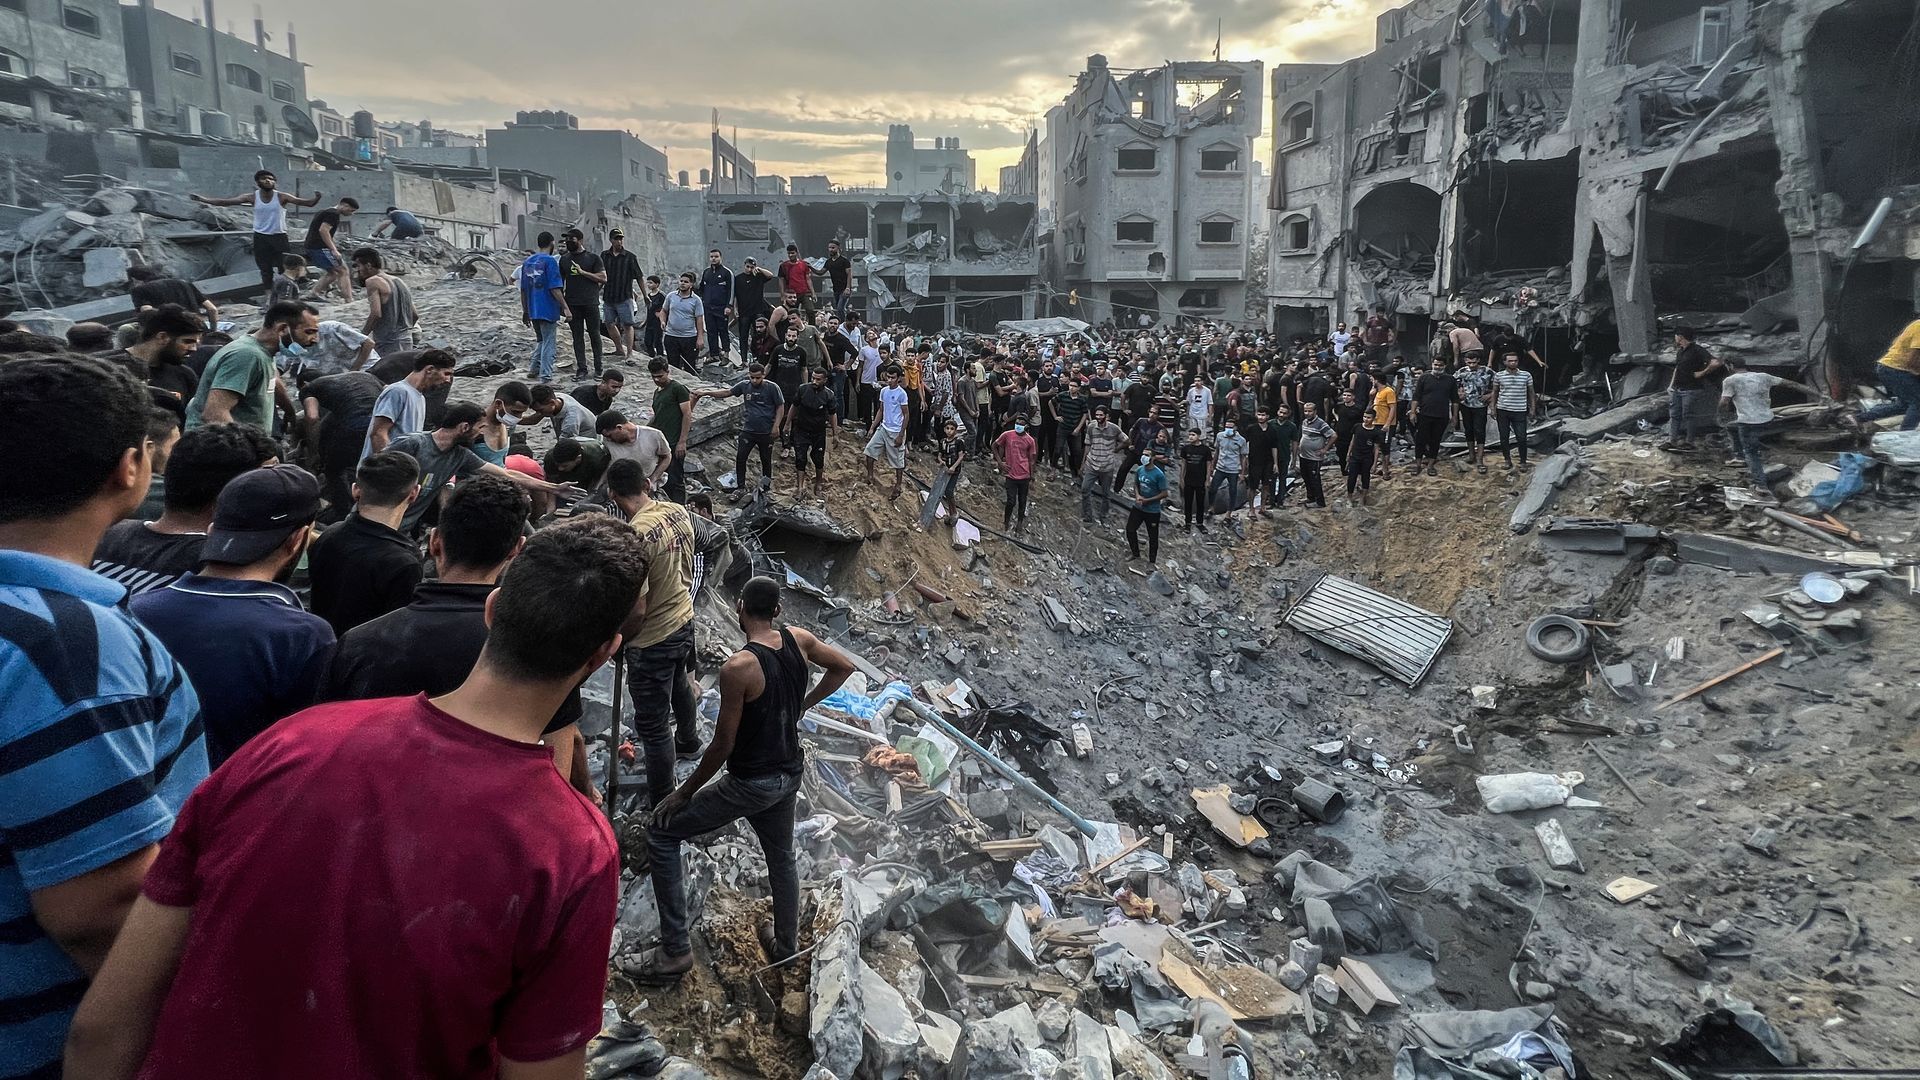 A screen grab from a video shows Palestinians searching for survivors following an Israeli airstrike in the Jabalia refugee. Photo: Fadi Wael Alwhidi/DPA/Picture Alliance via Getty Images